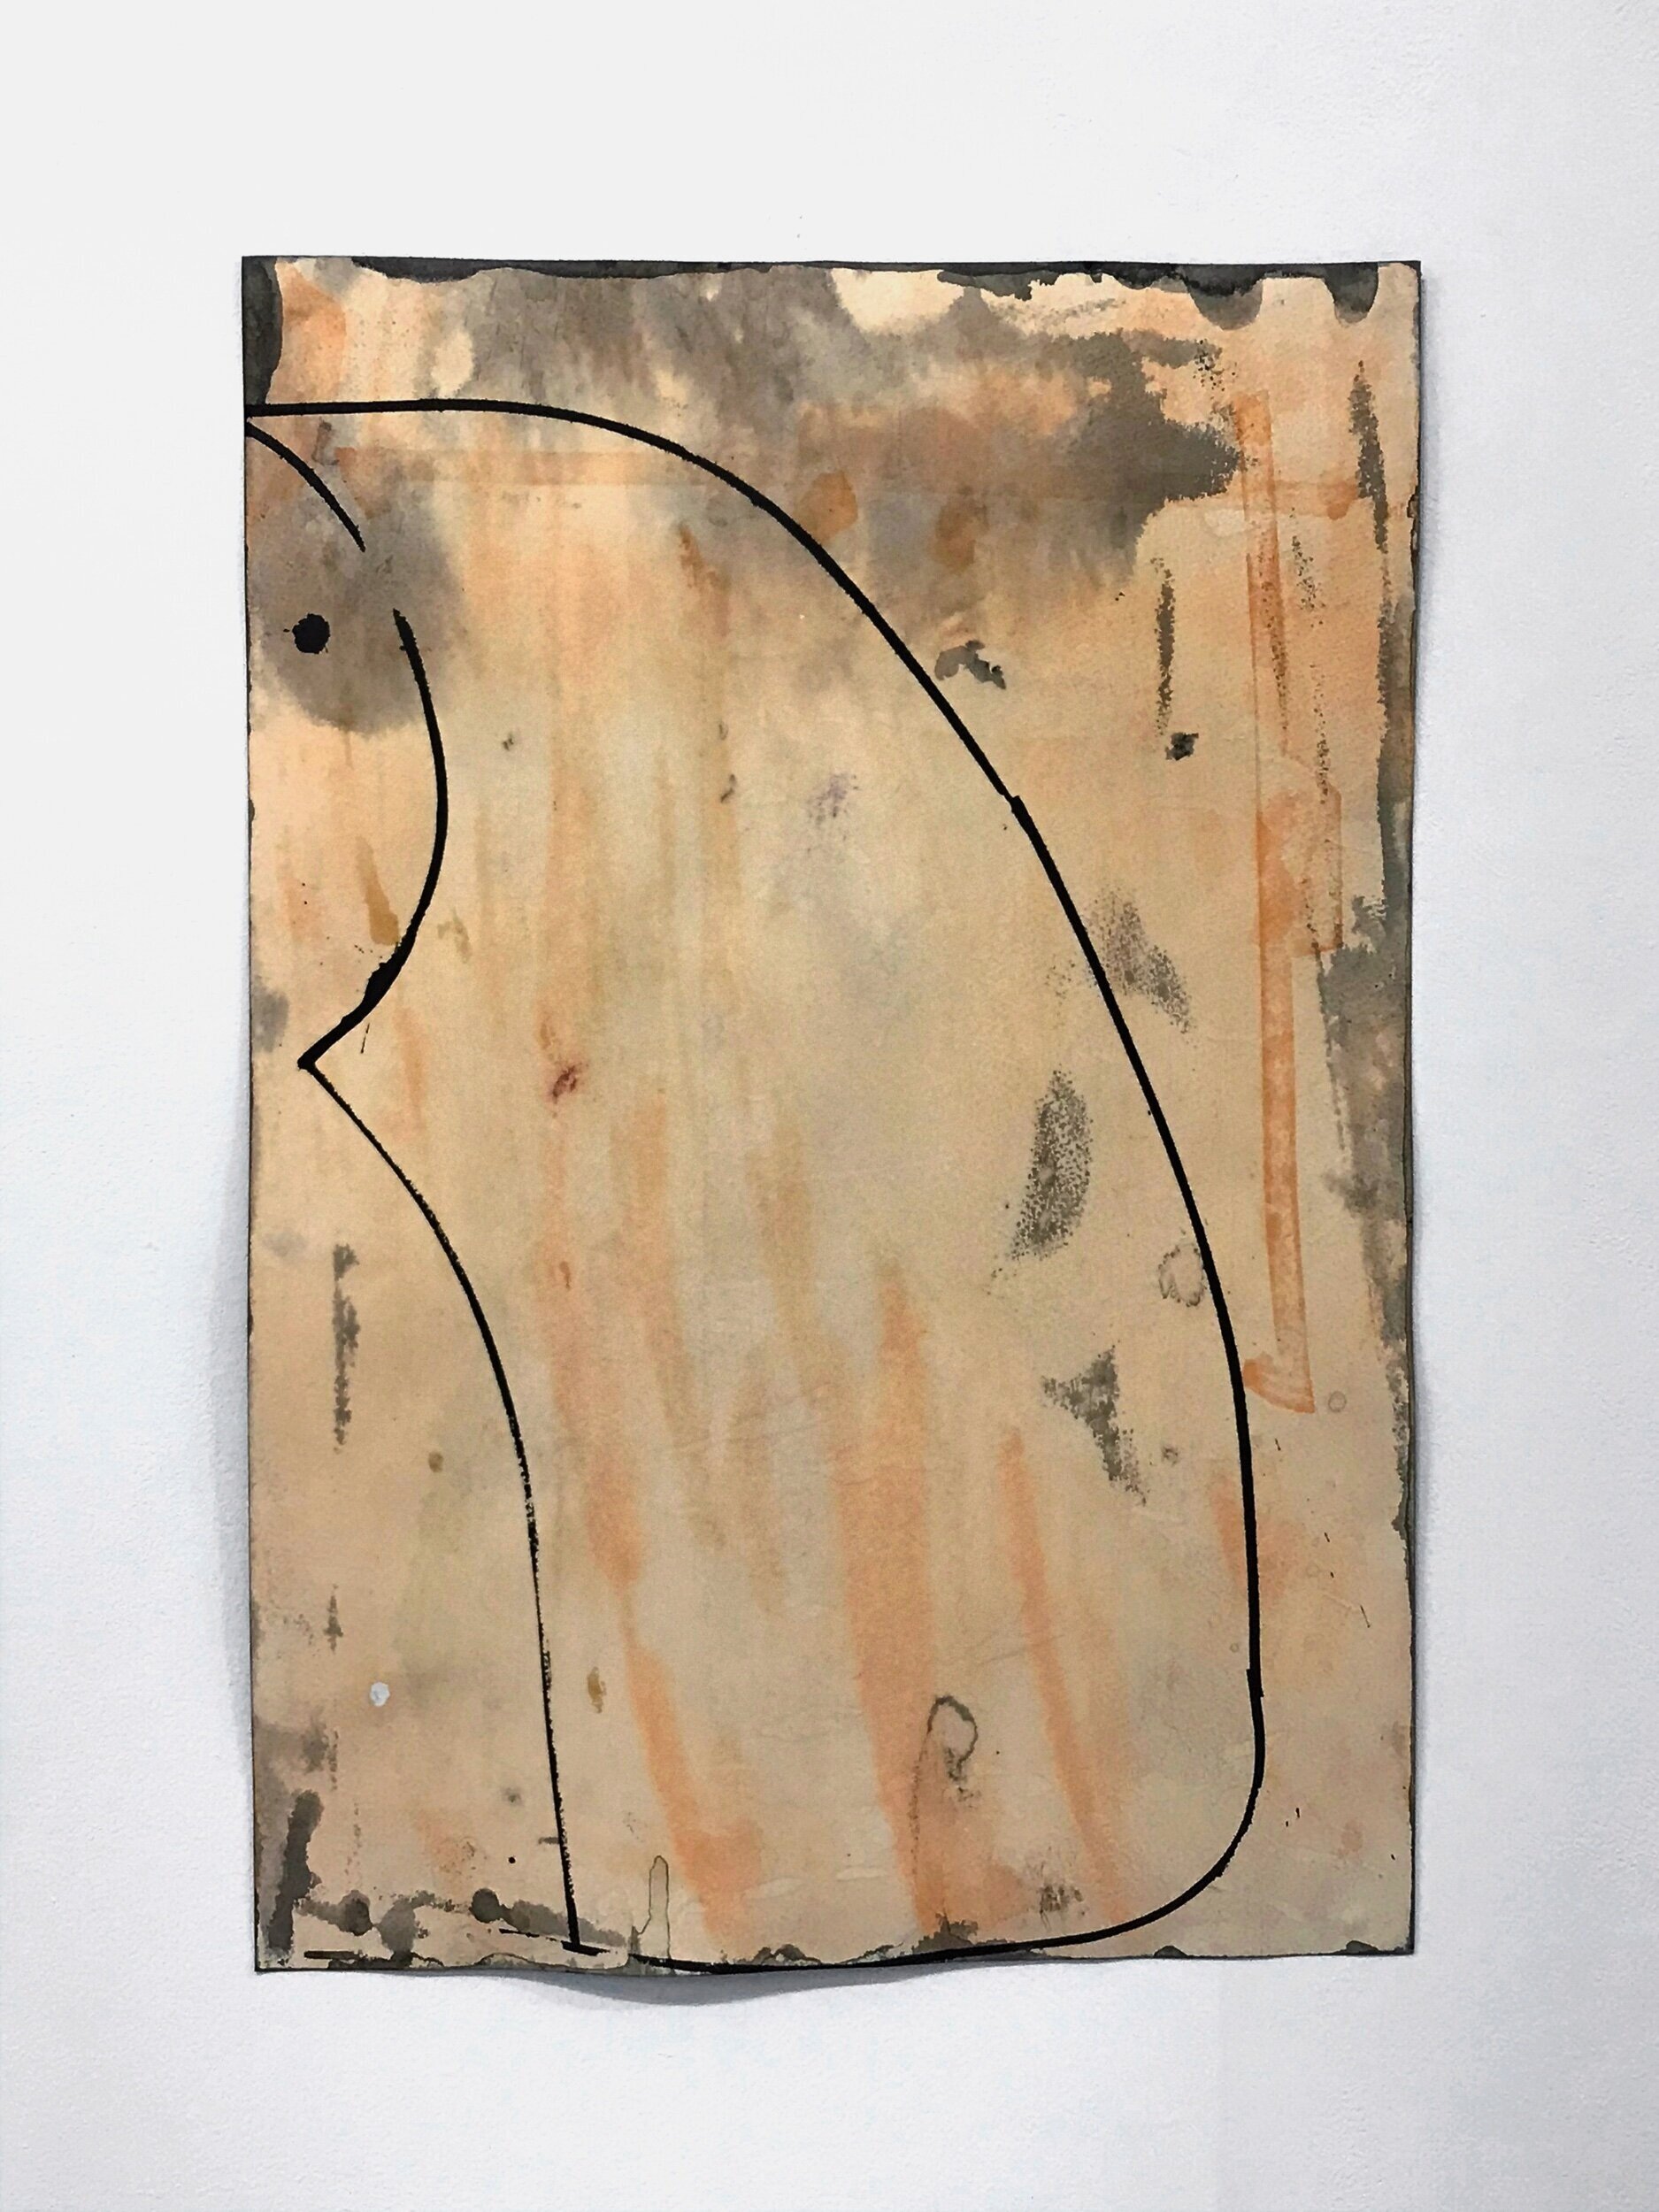 Vincent Hawkins, 'Wing 3' 2019, 56x38cm, ink & watercolour on paper.